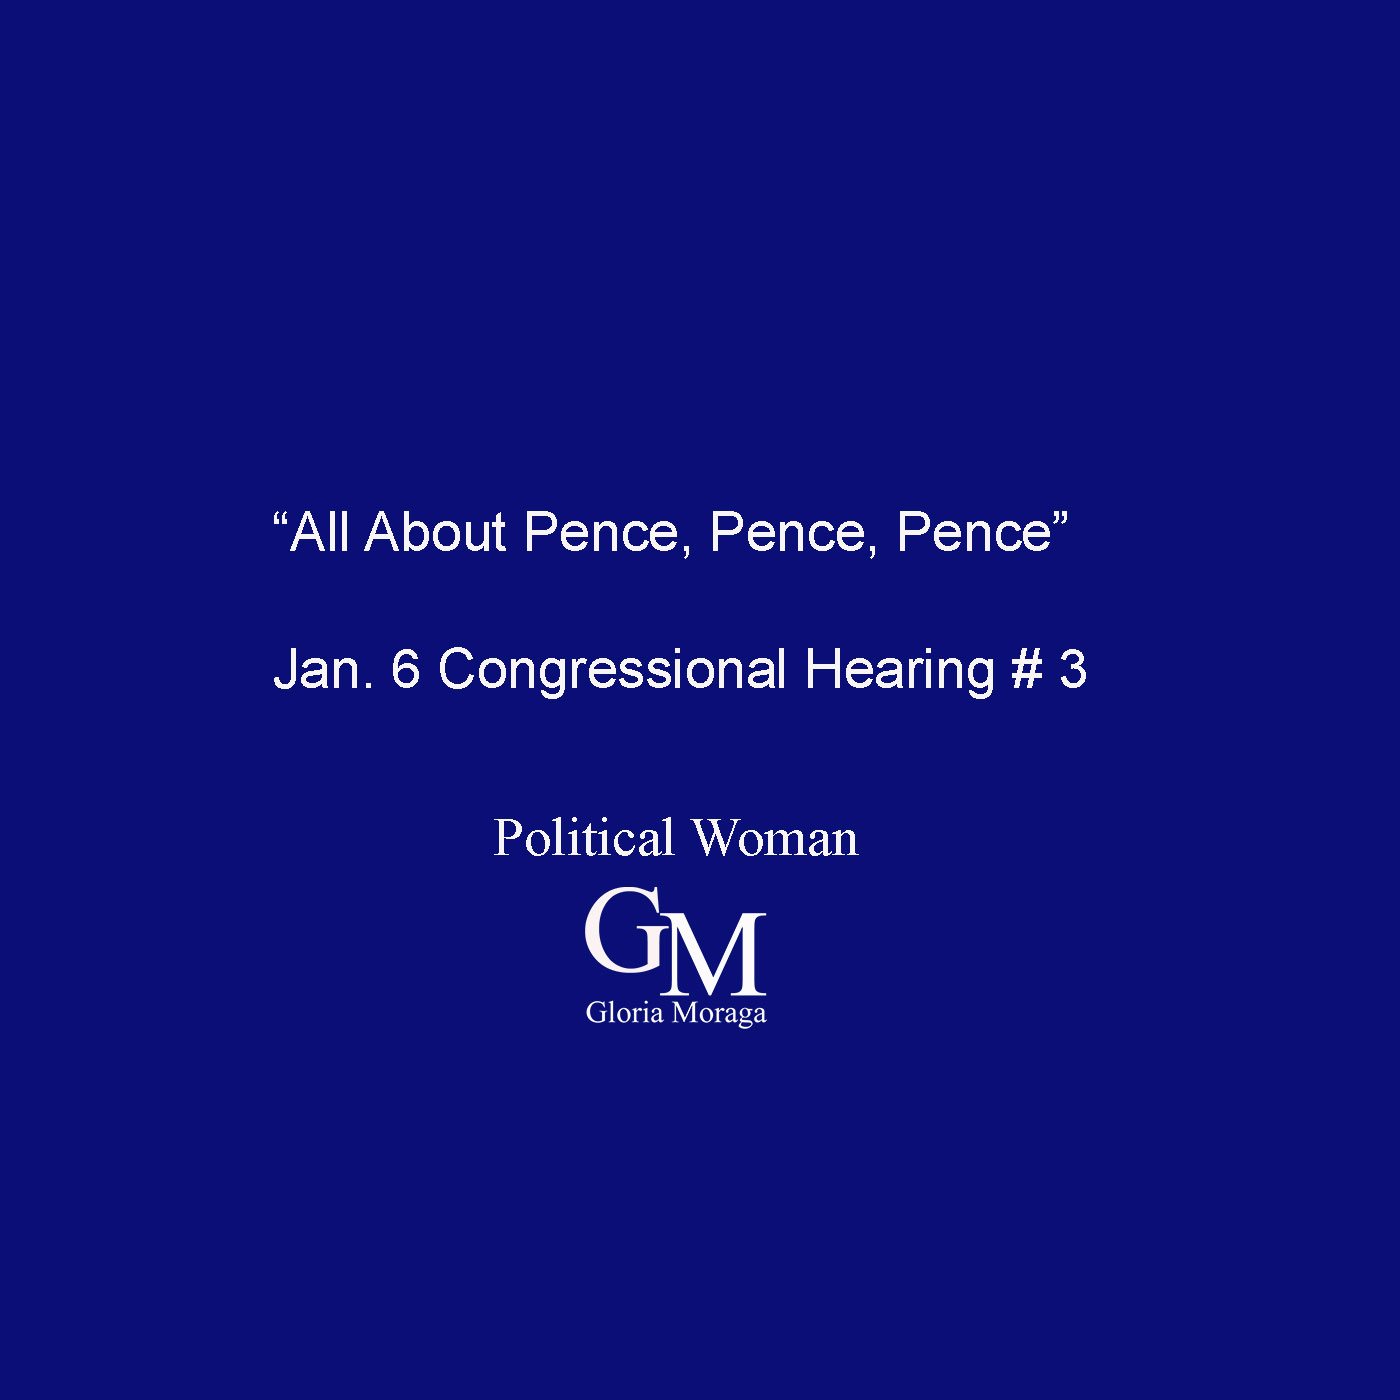 #3 All About Pence - Hearing #3